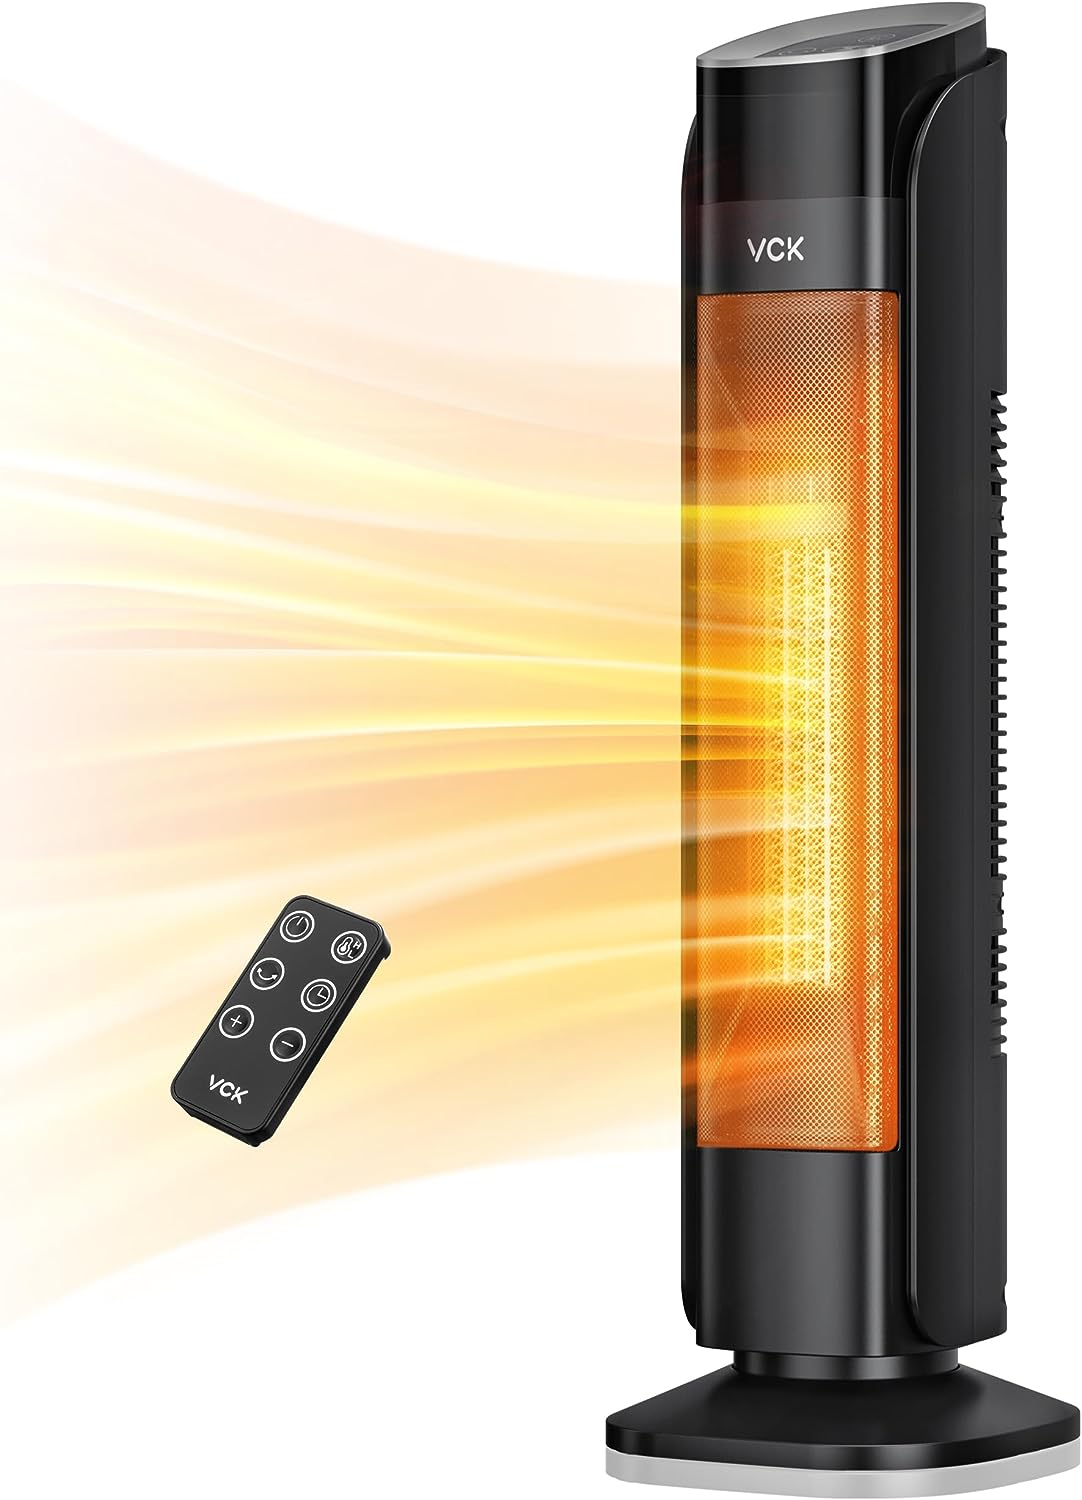 Snag Your Discount on the VCK 1500W 24" Portable Electric Heater - Limited-Time Promo!